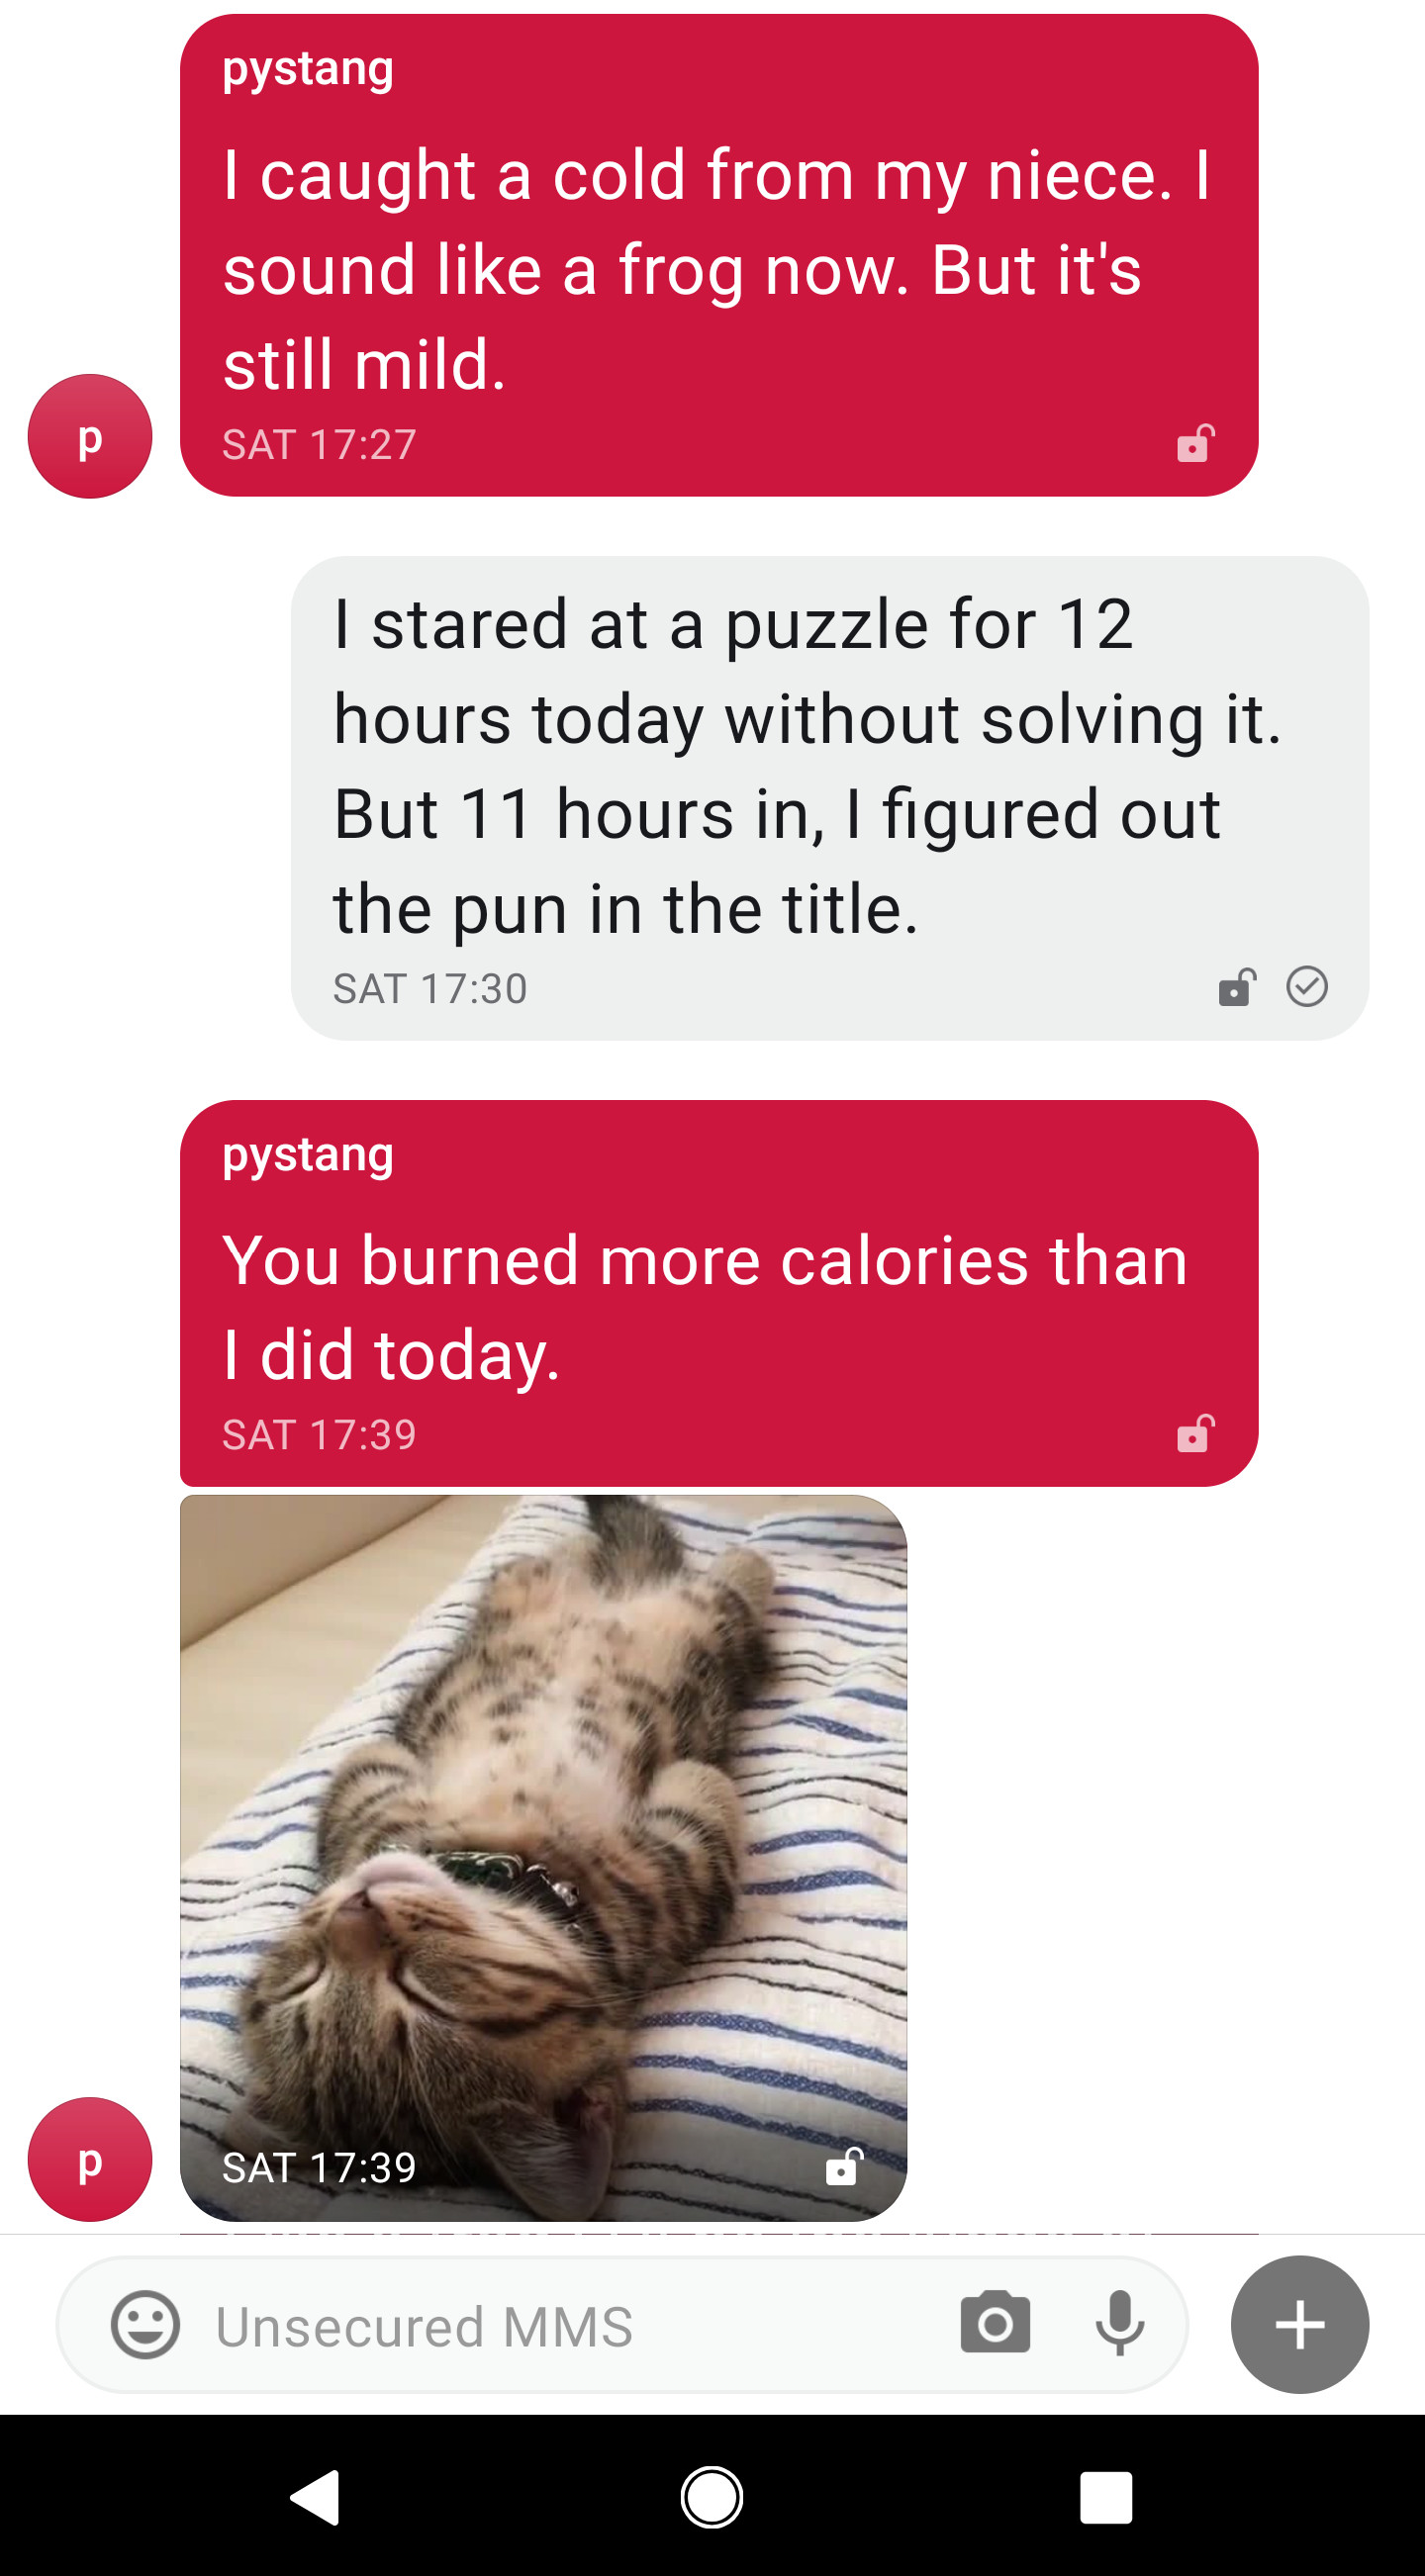 Chat transcript. Peter: I caught a cold from my niece. I sound like a frog now. but it's still mild. Me: I stared at a puzzle for 12 hours today without solving it. But 11 hours in, I figured out the pun in the title. Peter: You burned more calories than I did today. (photo of sleeping kitten)